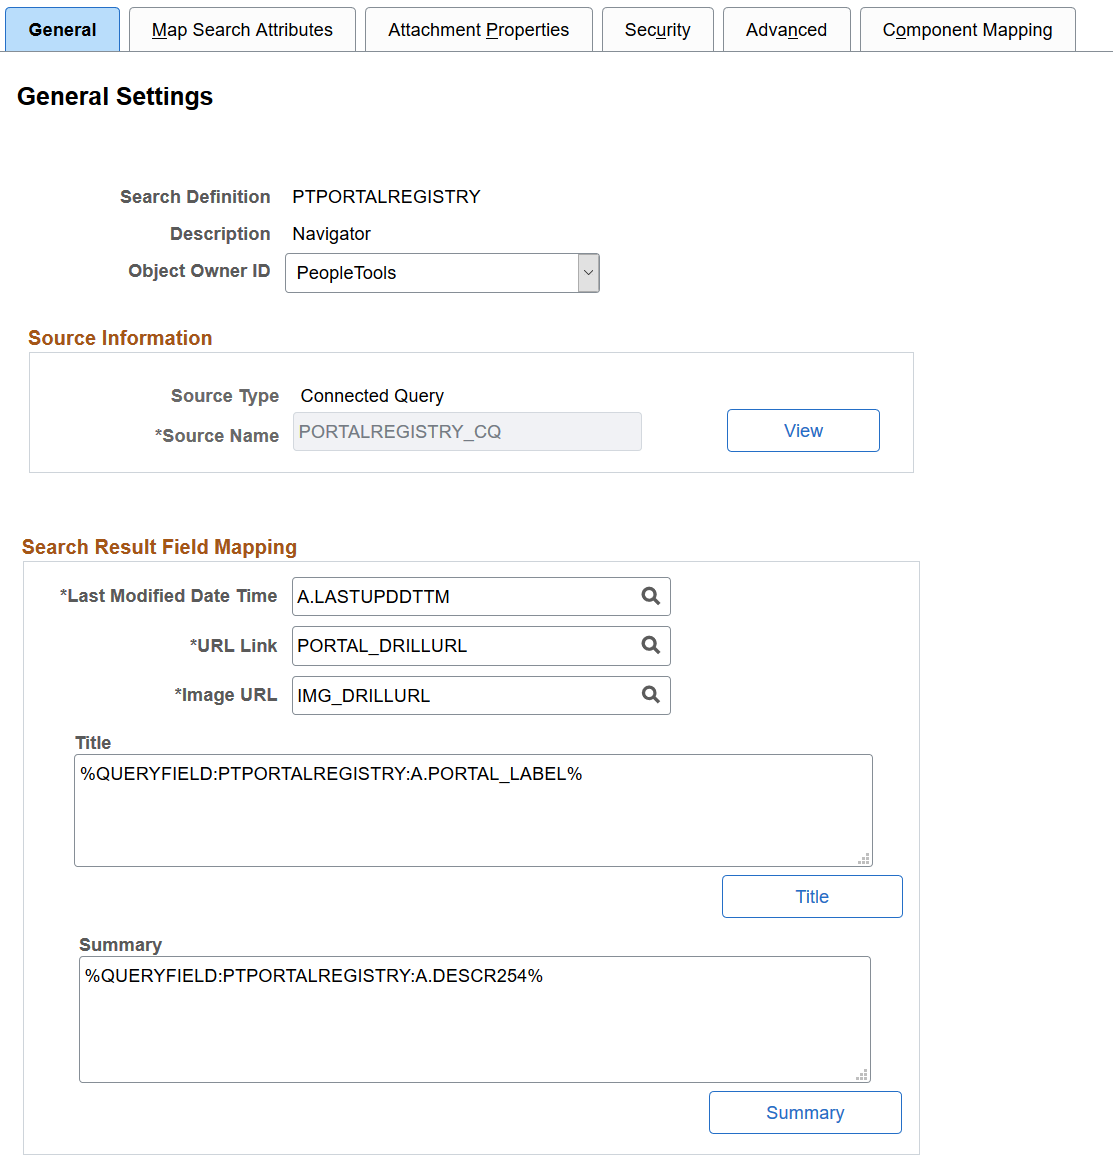 Search Definition - General Settings page